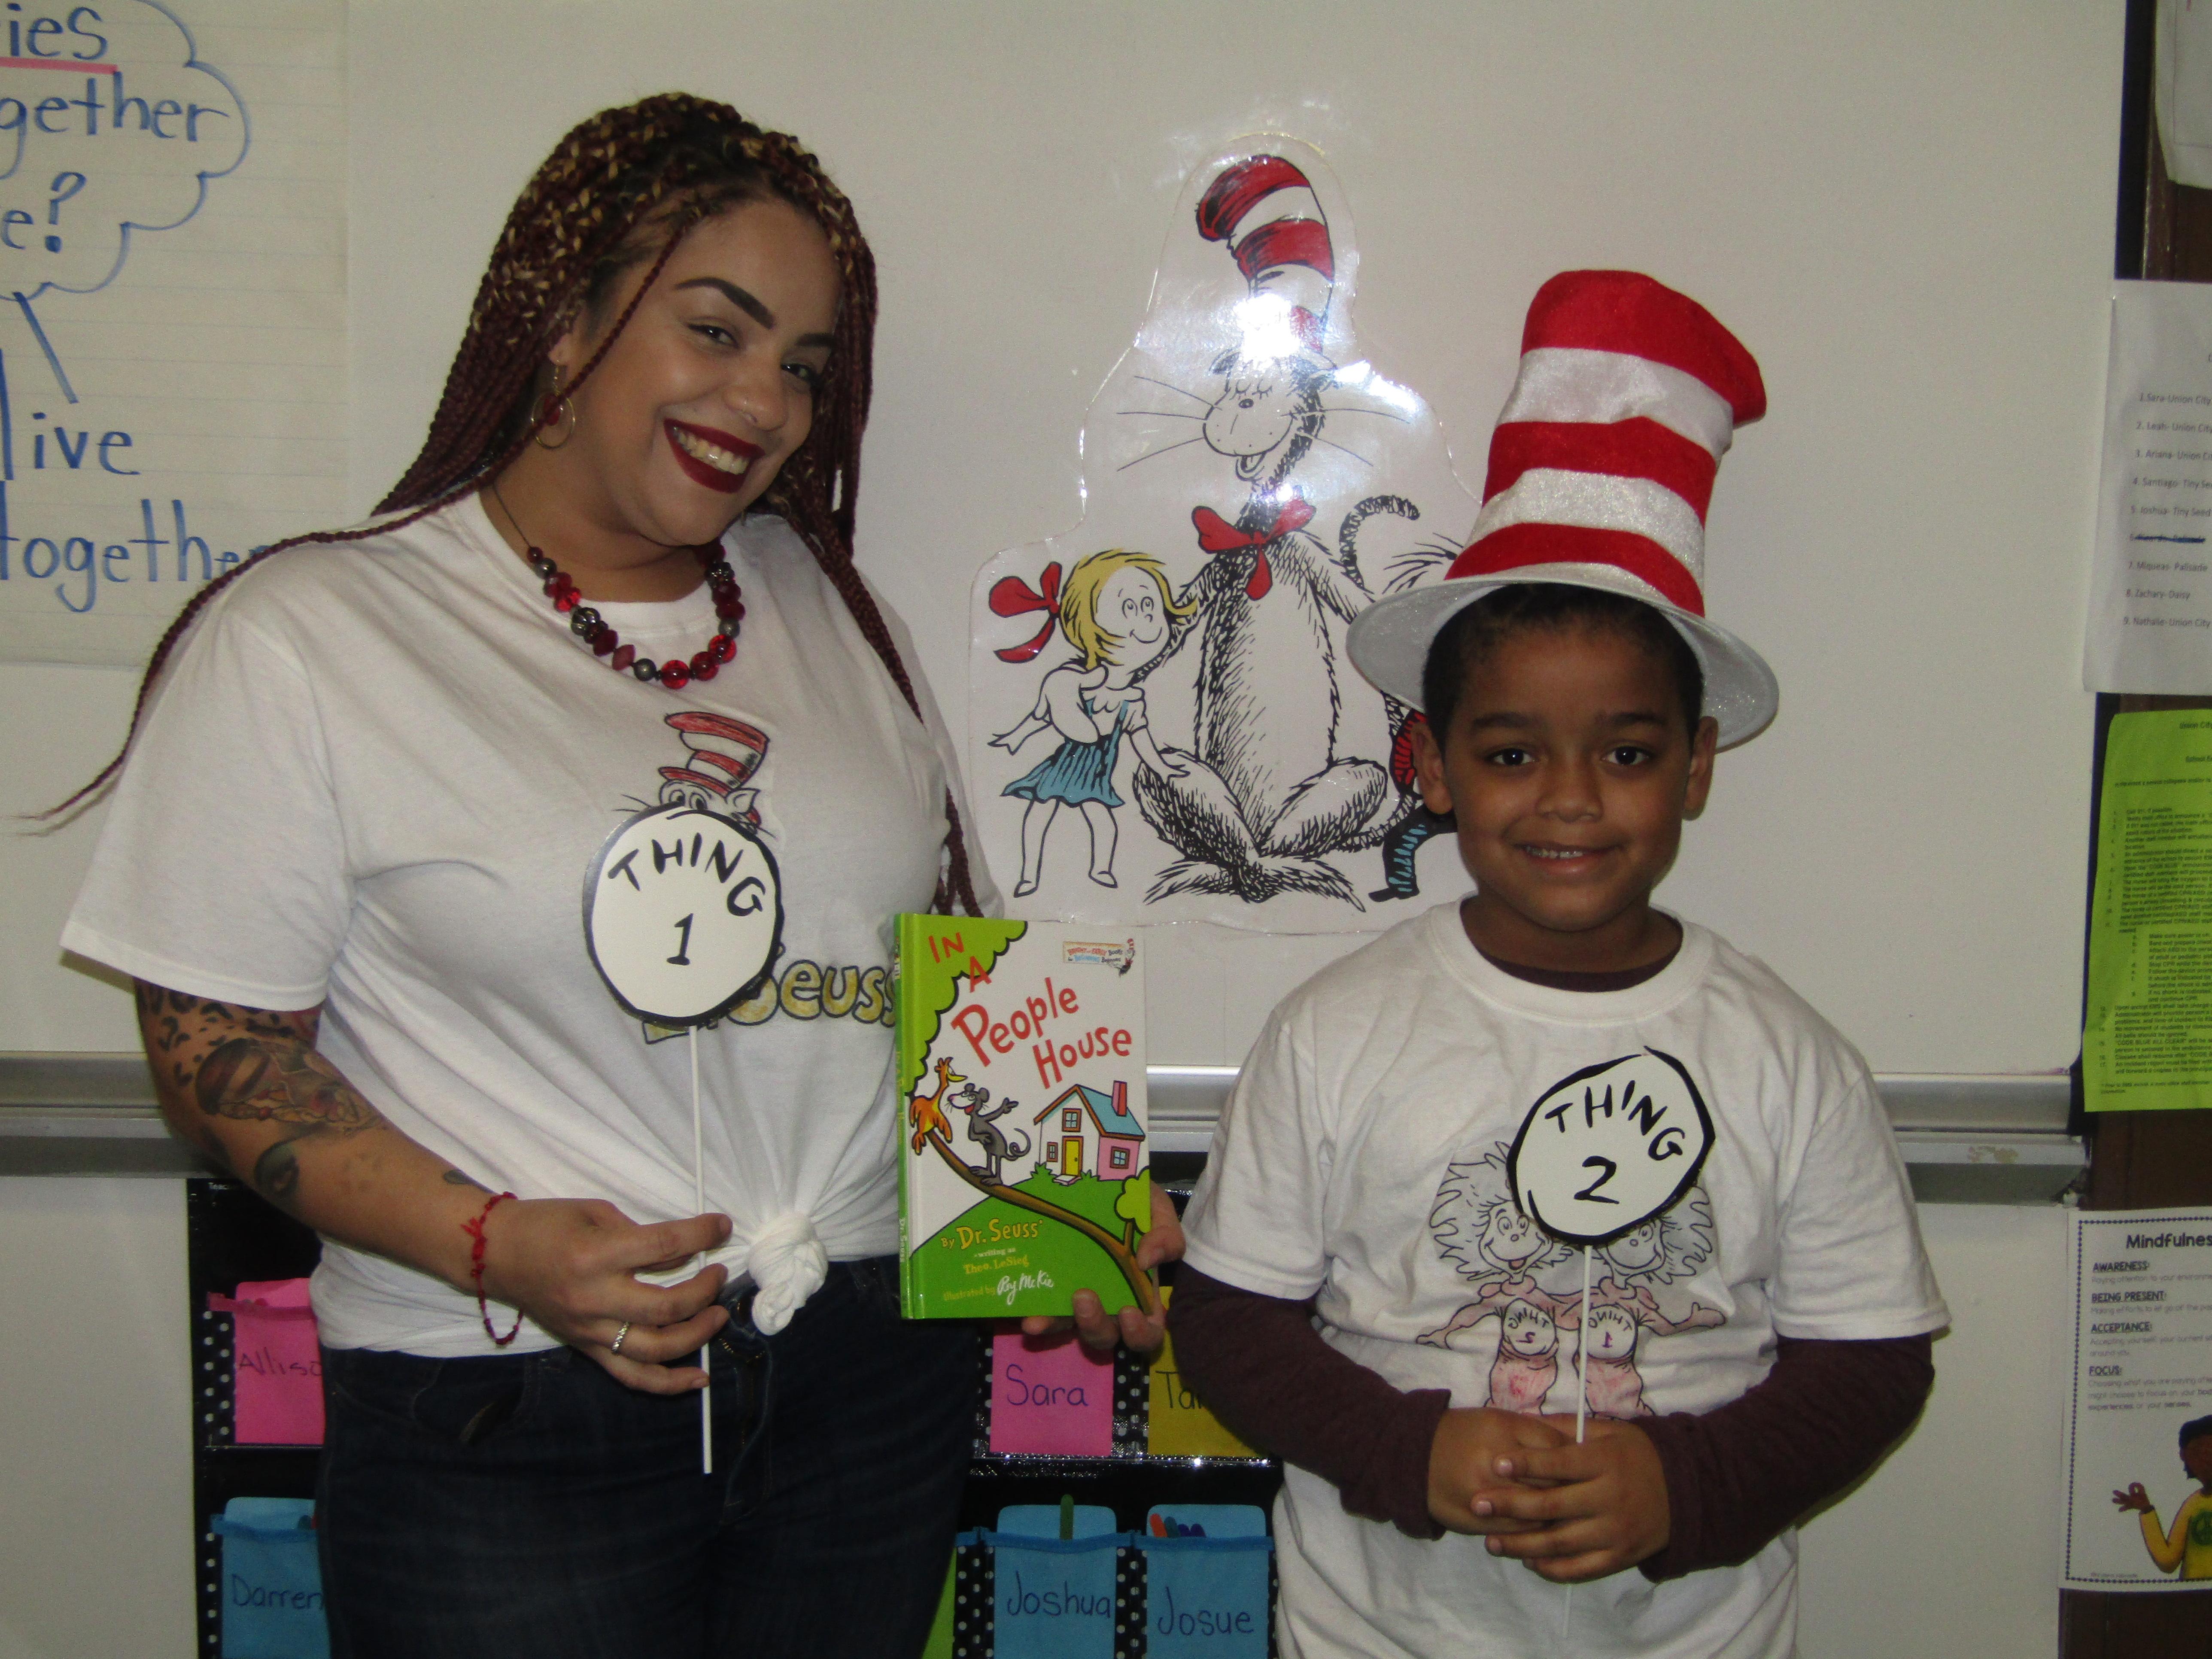 proud mom and son wearing matching things 1 & 2 shirts holding dr. seuss book